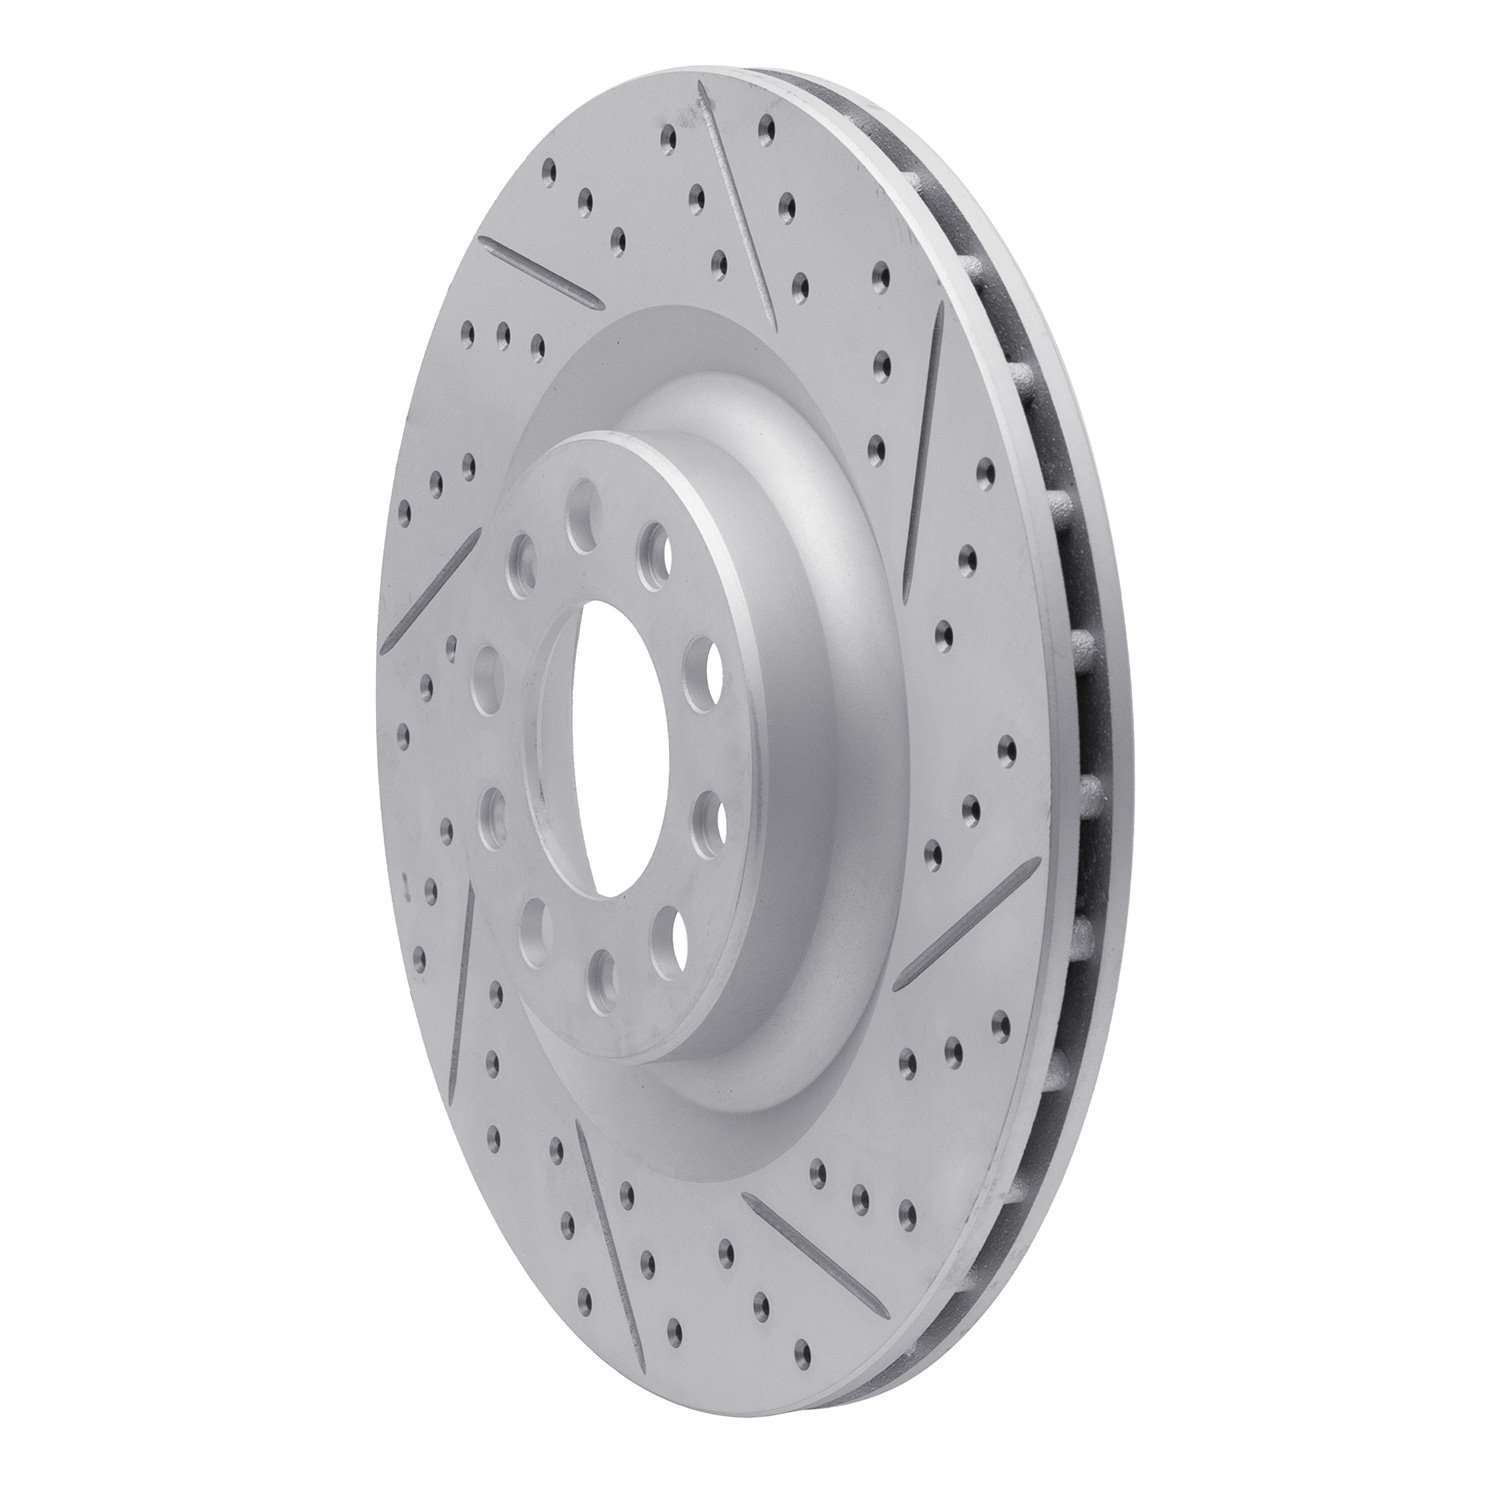 830-16013R Geoperformance Drilled/Slotted Brake Rotor, Fits Select Alfa Romeo, Position: Rear Right